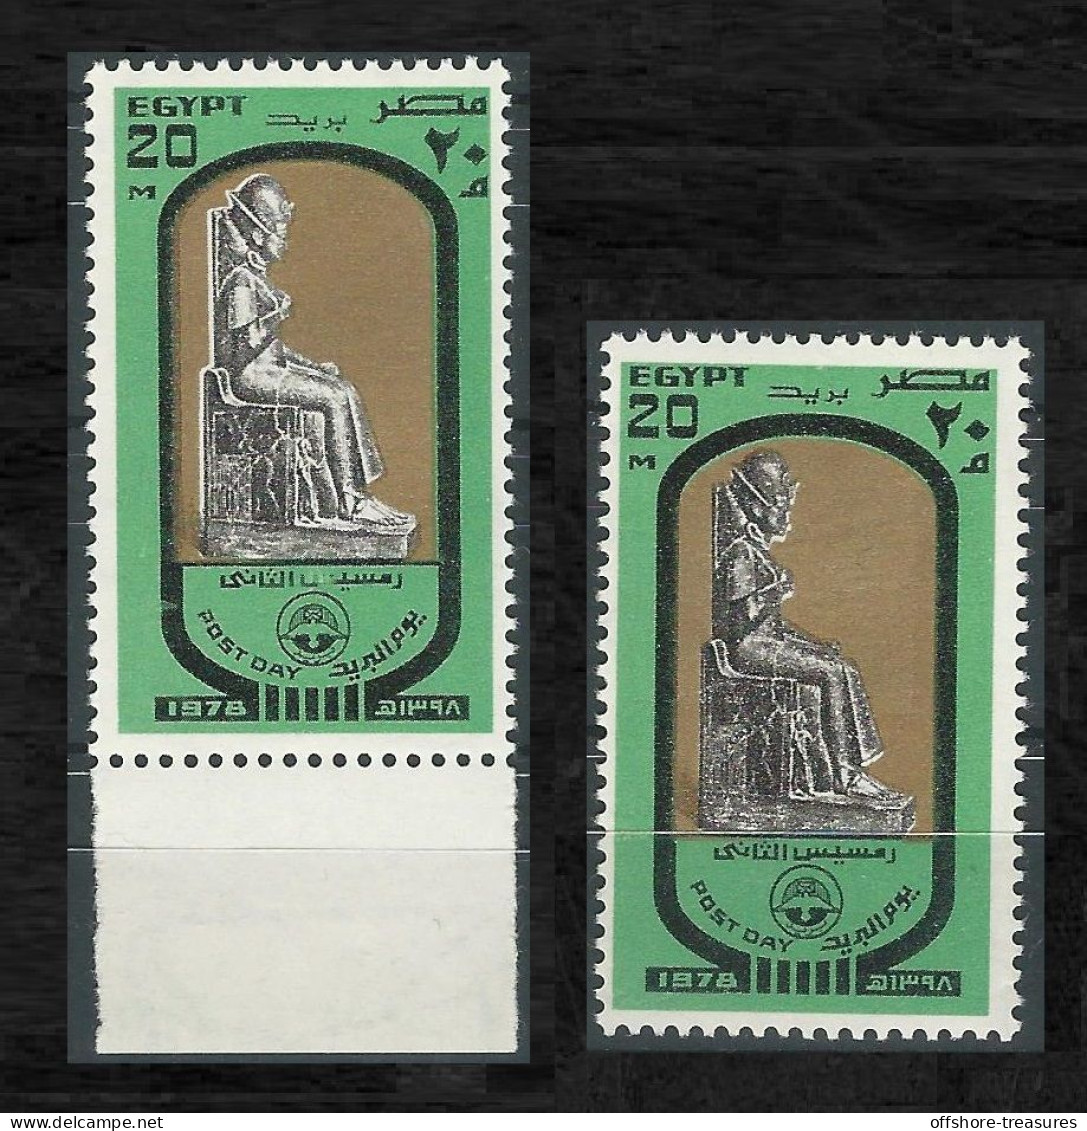 Egypt 1987 King Ramses Post Day 2 STAMP PRINT VARIETY / ERROR MNH STAMPS / SEE SCANS - Briefe U. Dokumente